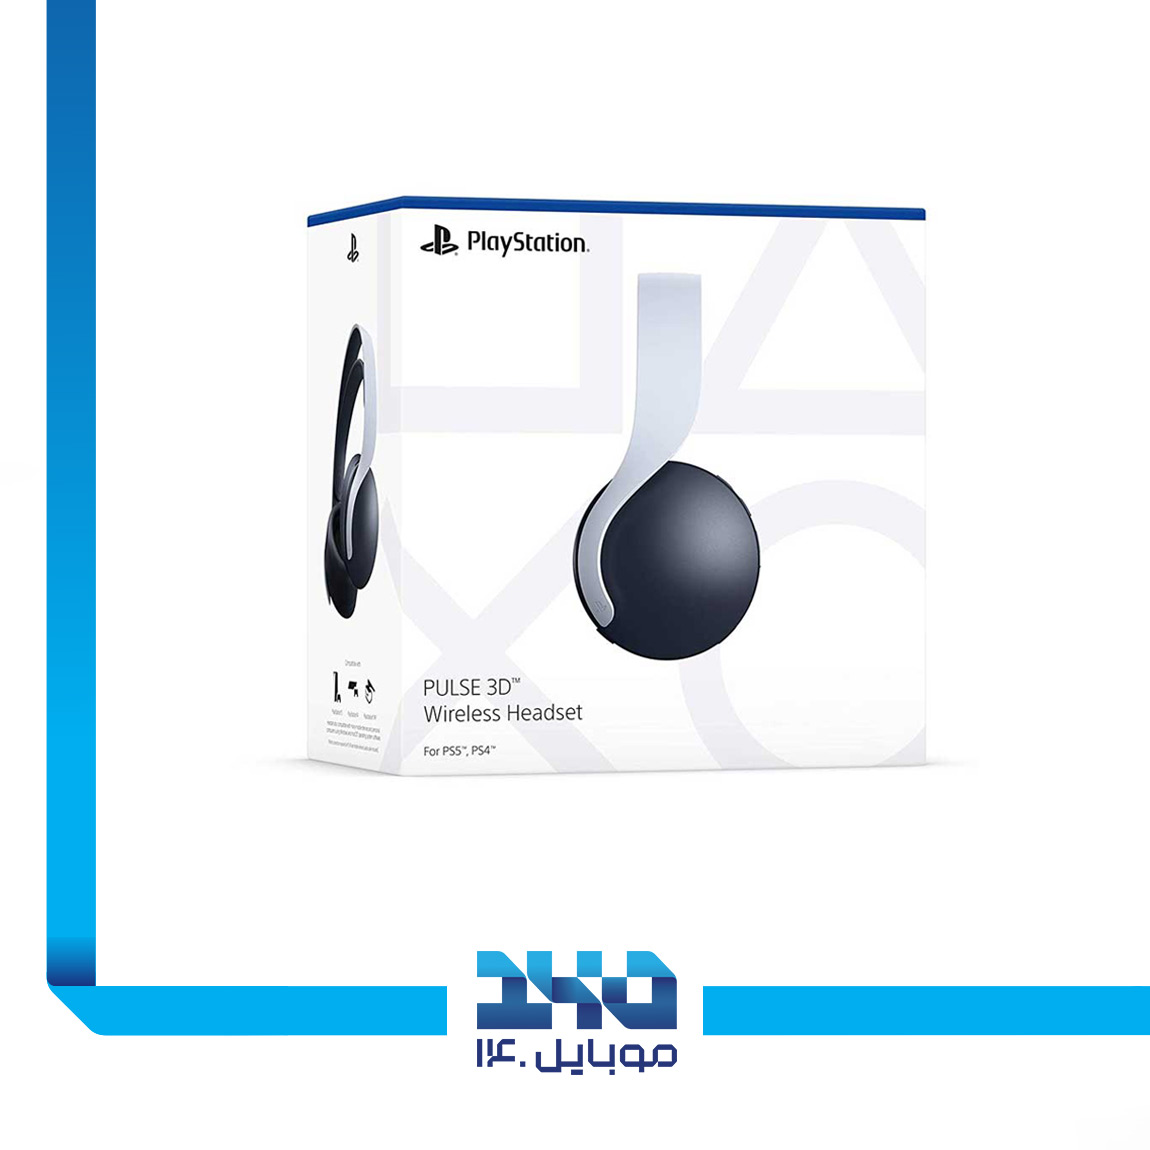 Play Station 5 PULSE 3D Wireless Headset 4